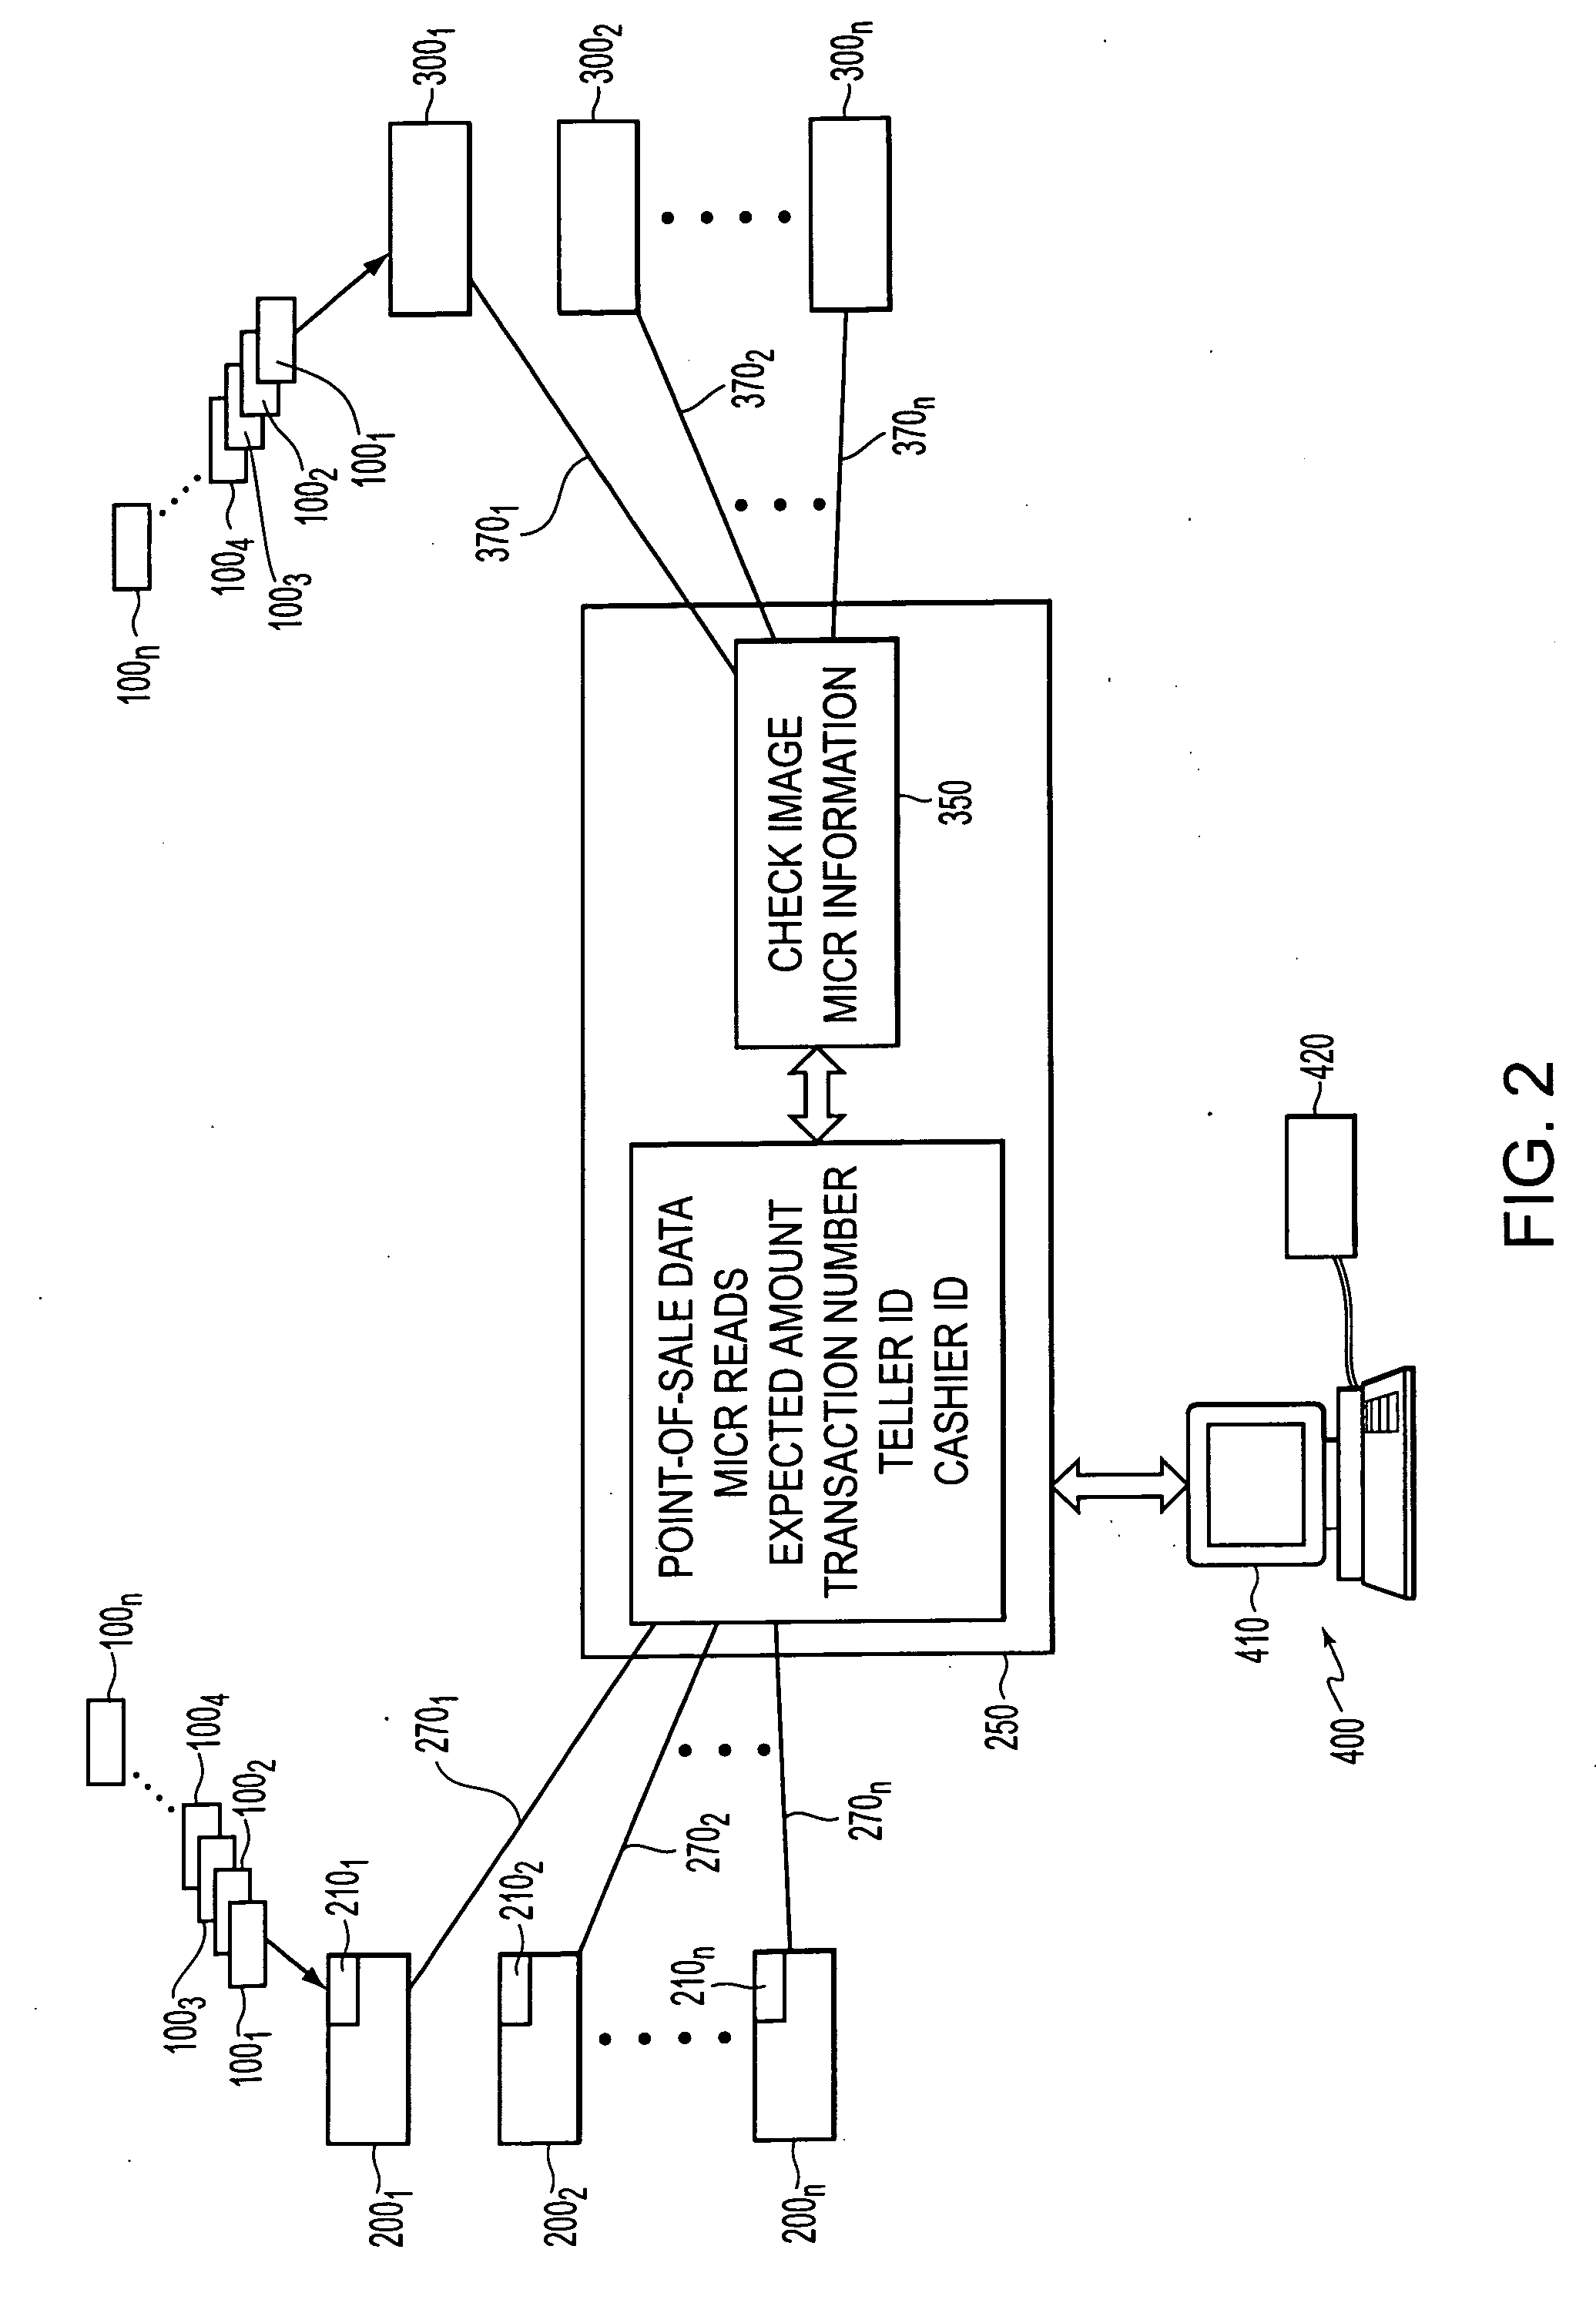 Method and apparatus for processing checks